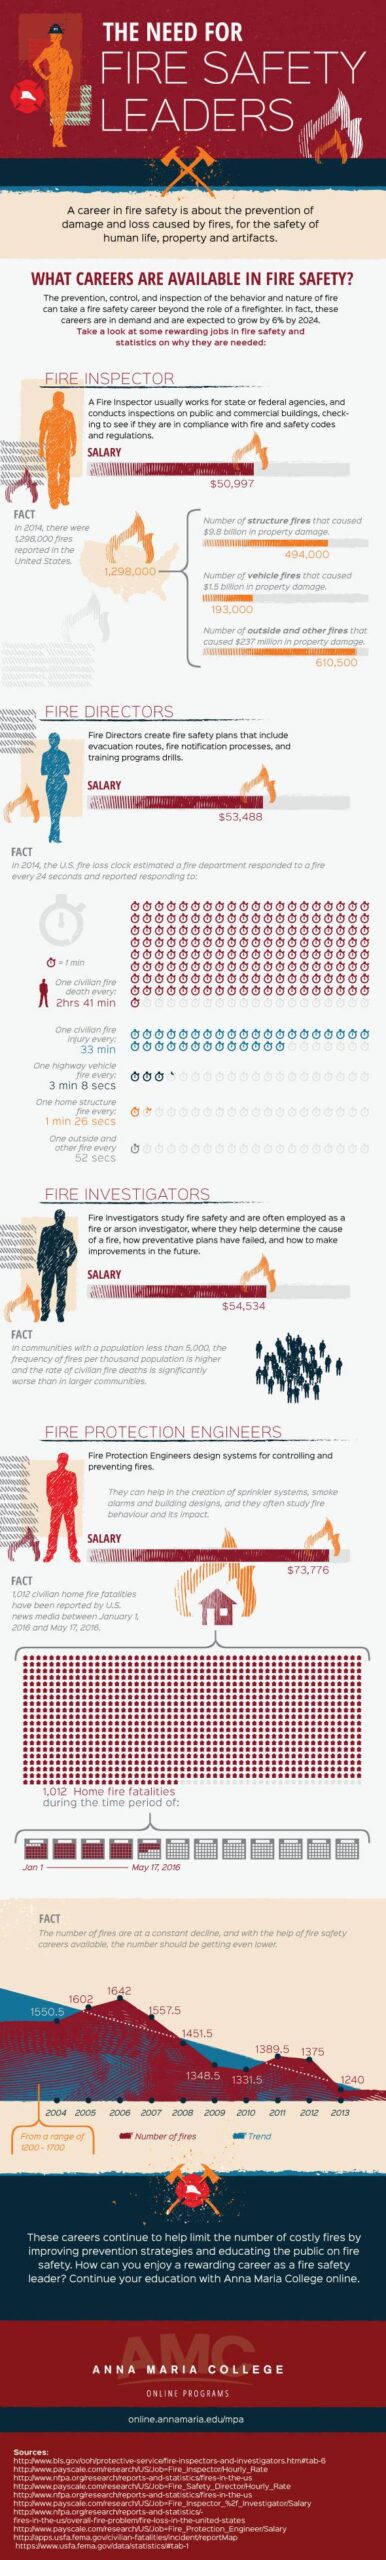 Infographic with blue, maroon, orange, and cream colors that includes charts, information about fire safety leaders, and lists fire safety careers